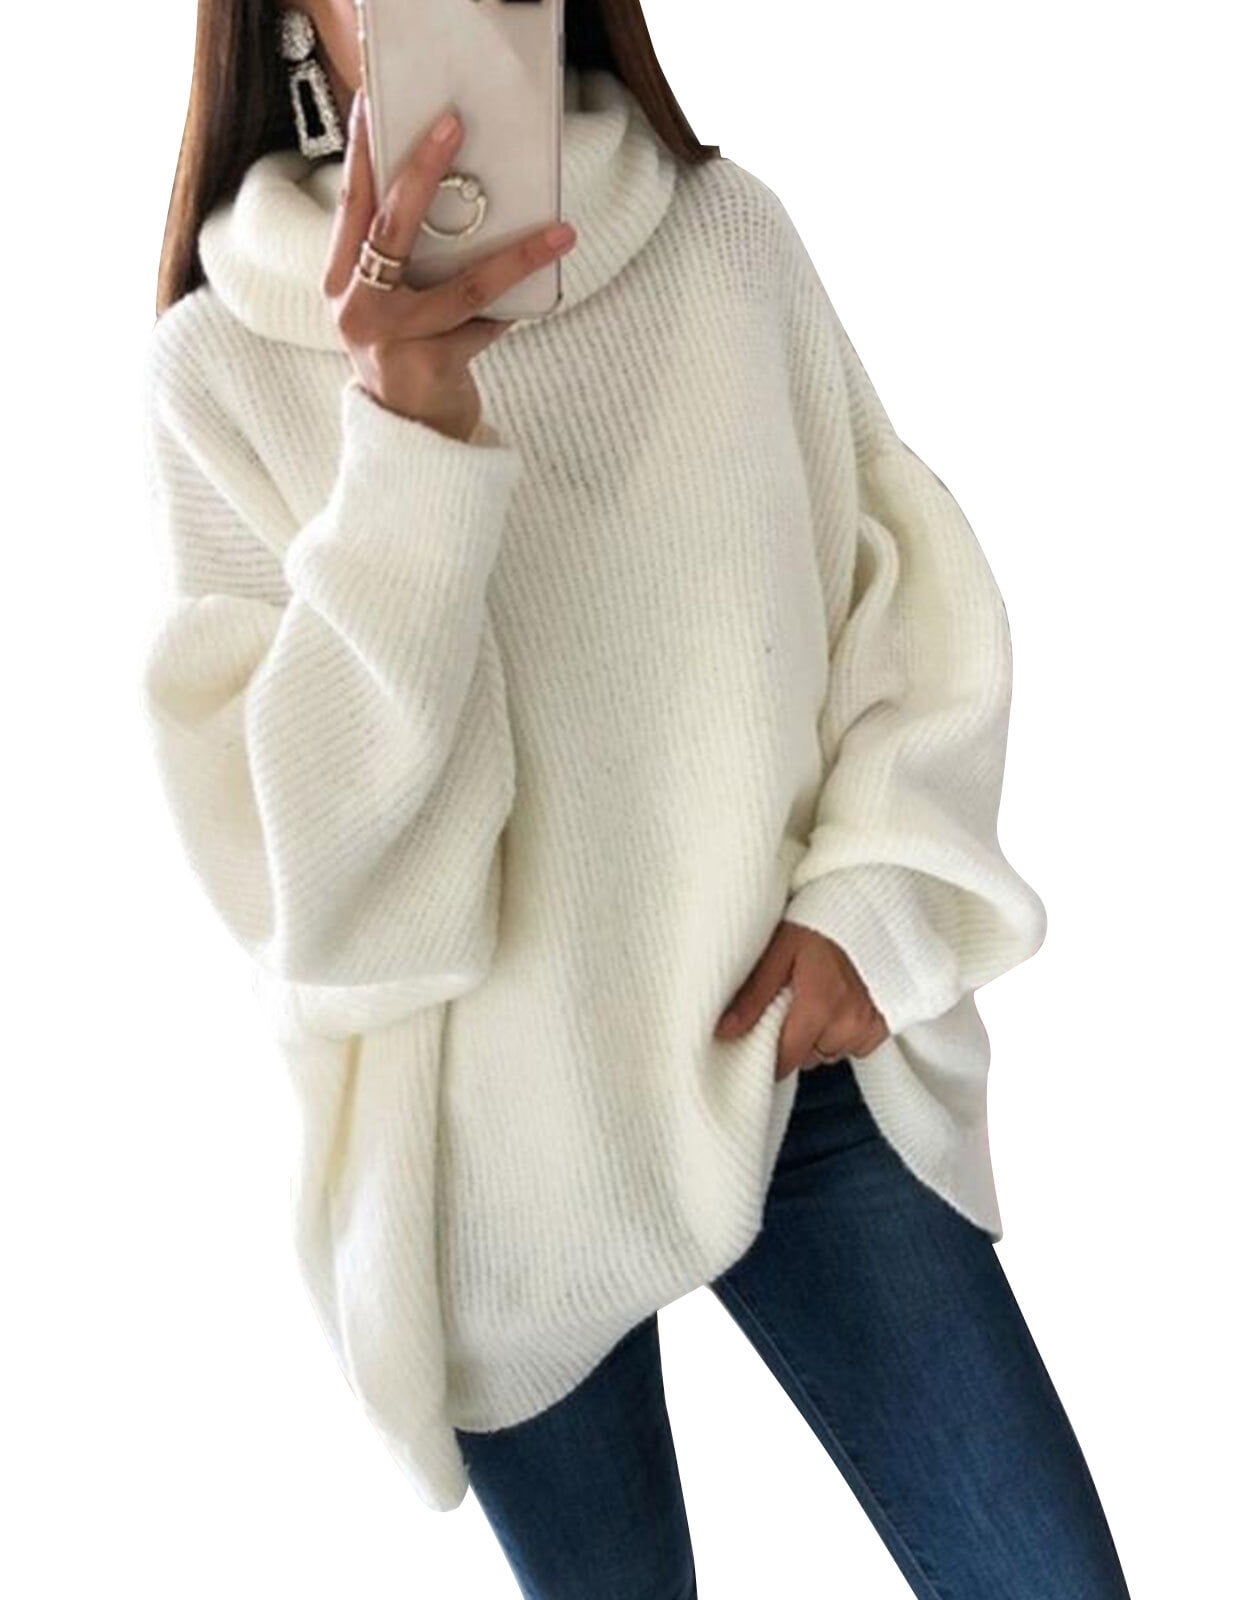 Sweaters for Women Plus Size Solid Color Warm Turtleneck Sweaters Oversized Casual Loose Sweater ...